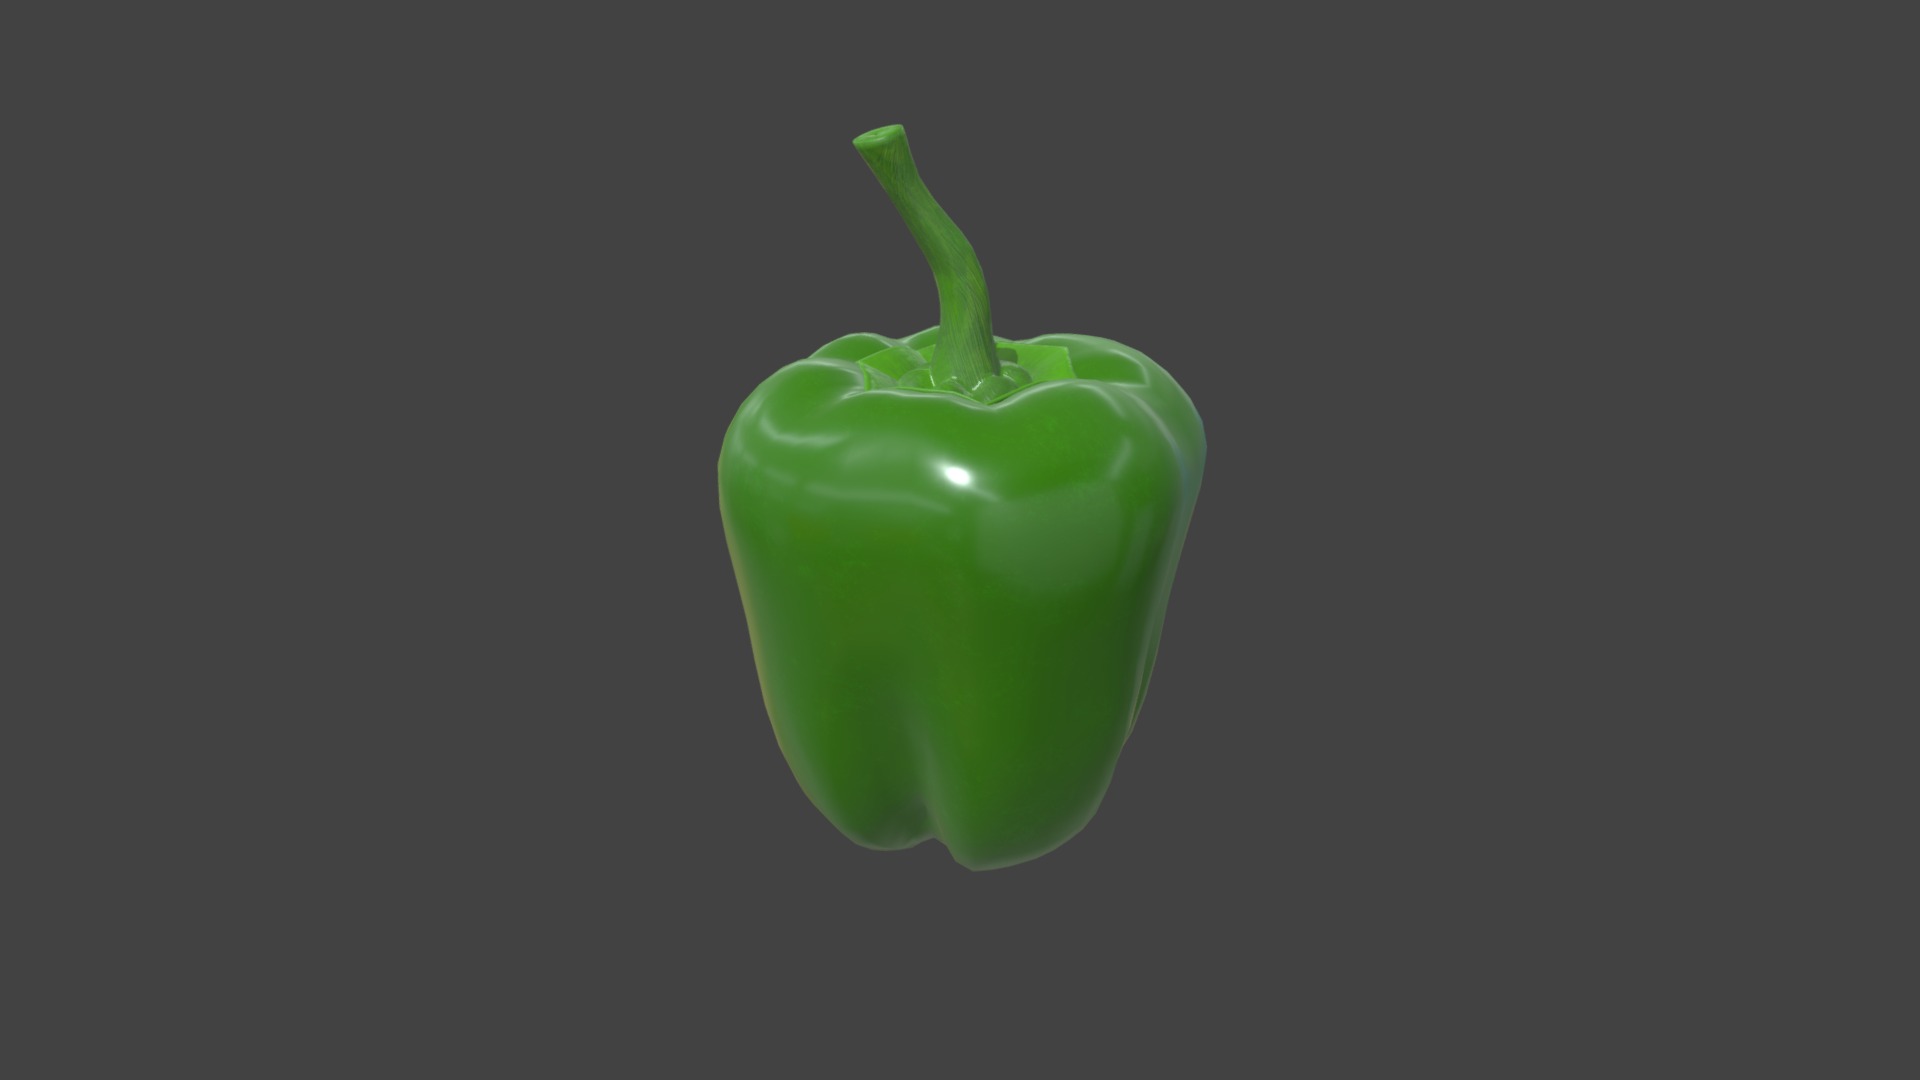 3D model Pepper bell dreen - This is a 3D model of the Pepper bell dreen. The 3D model is about a green apple with a green stem.